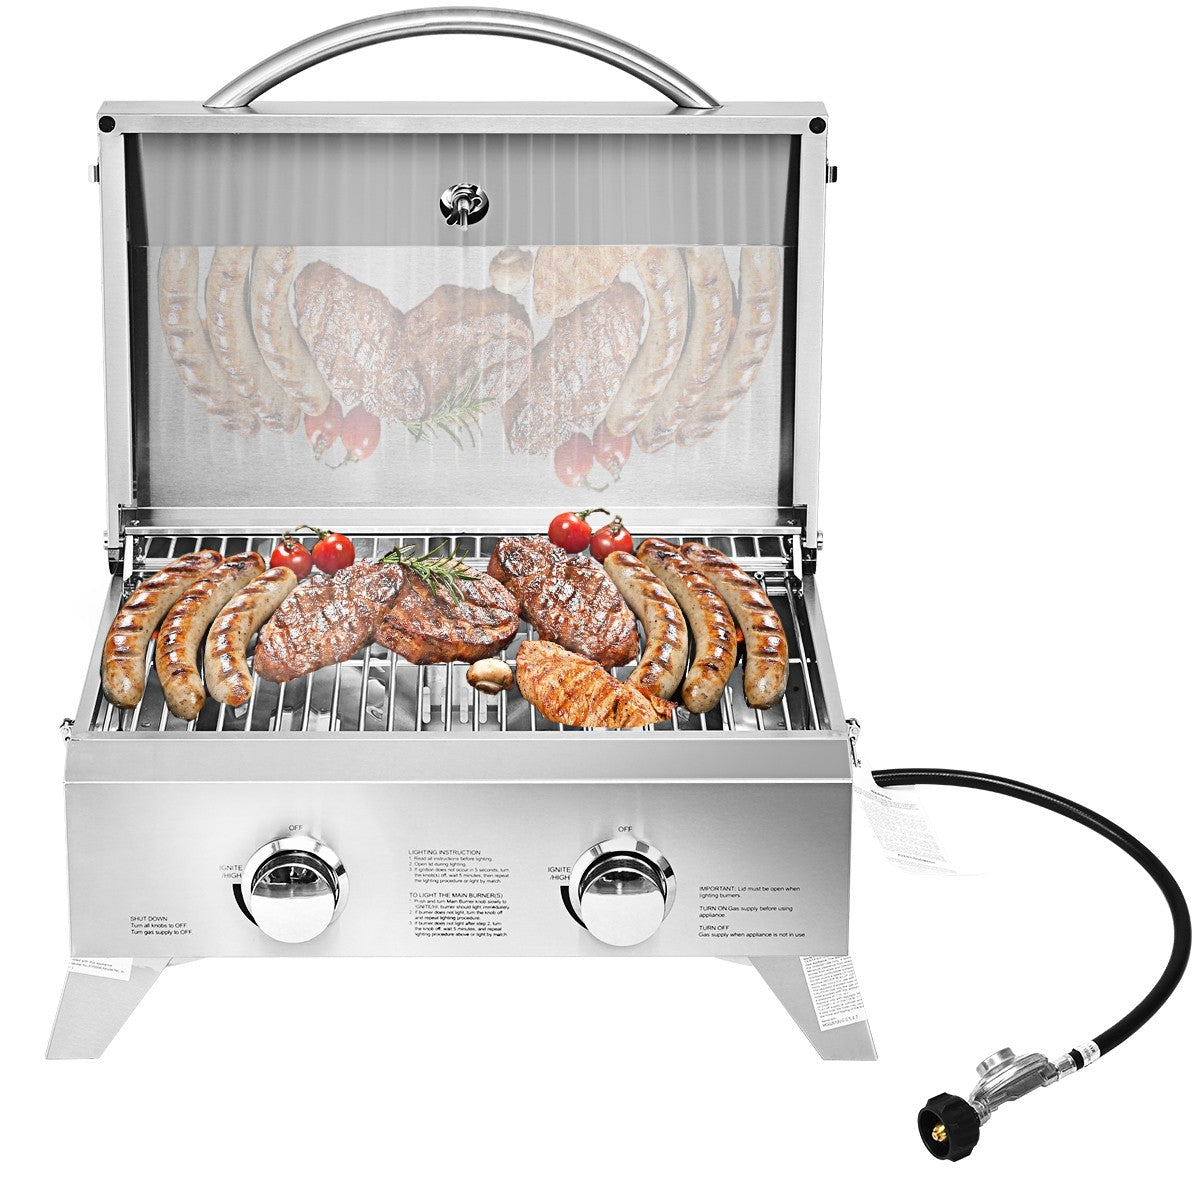 Propane TableTop Gas Grill Stainless Steel Two-Burner BBQ - Giantex